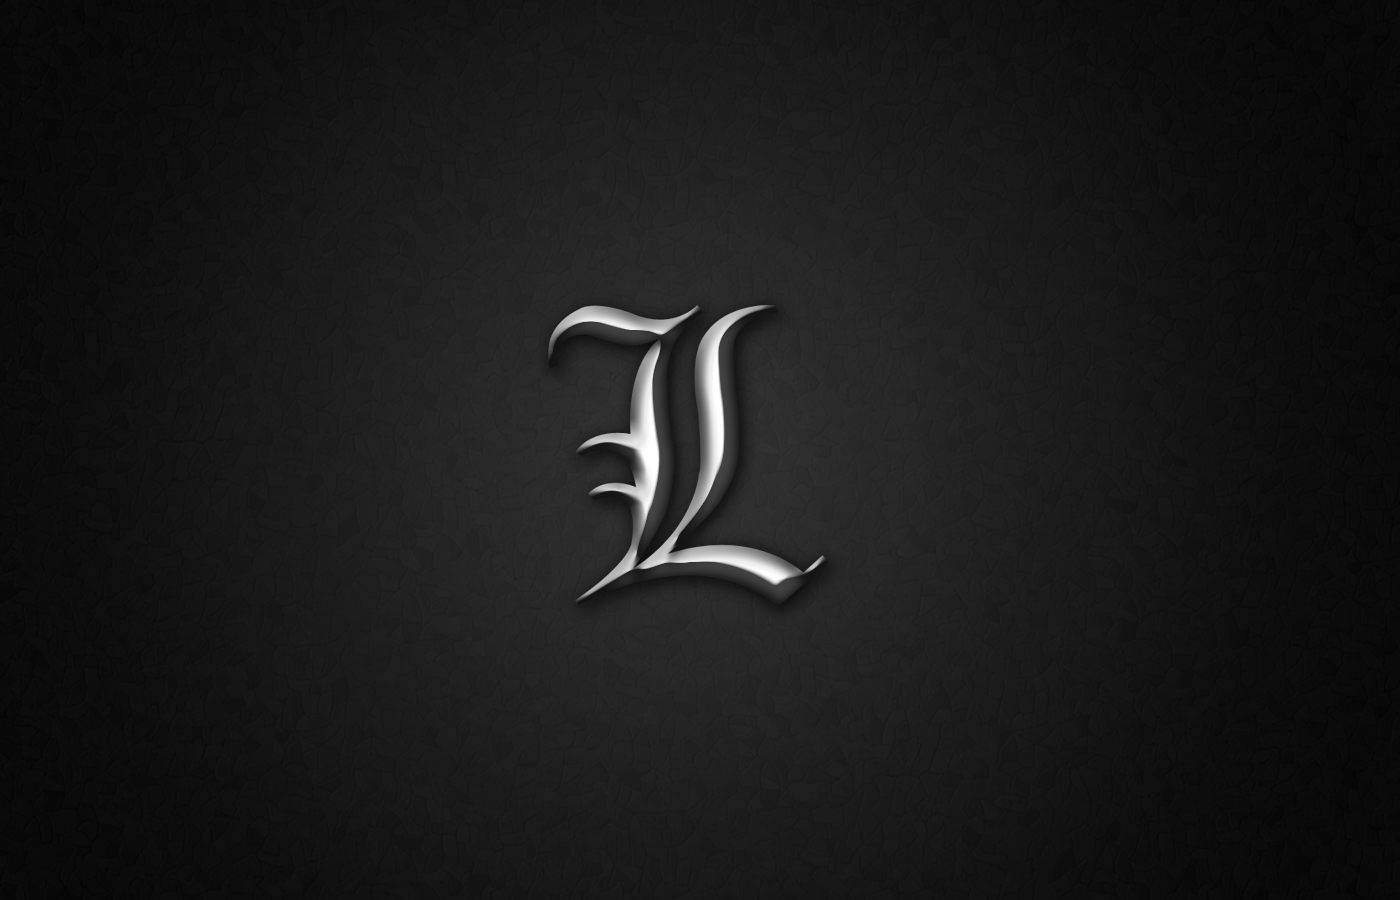 [49+] l from death note wallpaper on wallpapersafari on cool anime death note l logo wallpapers